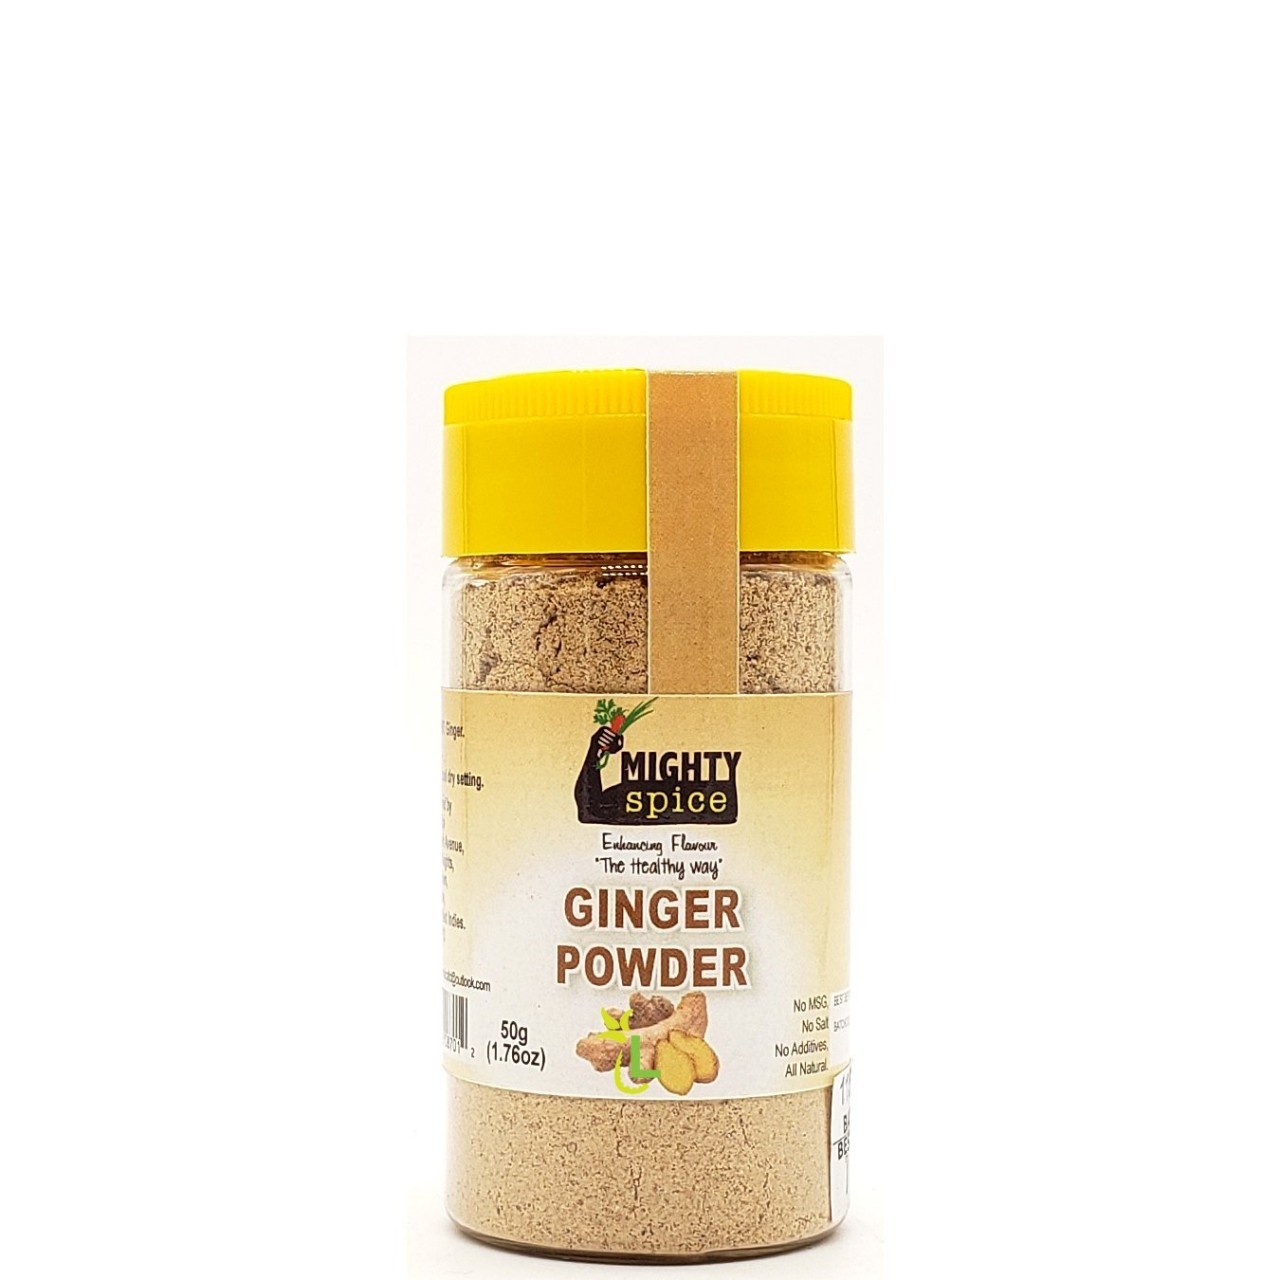 MIGHTY SPICE GINGER POWDER 50g